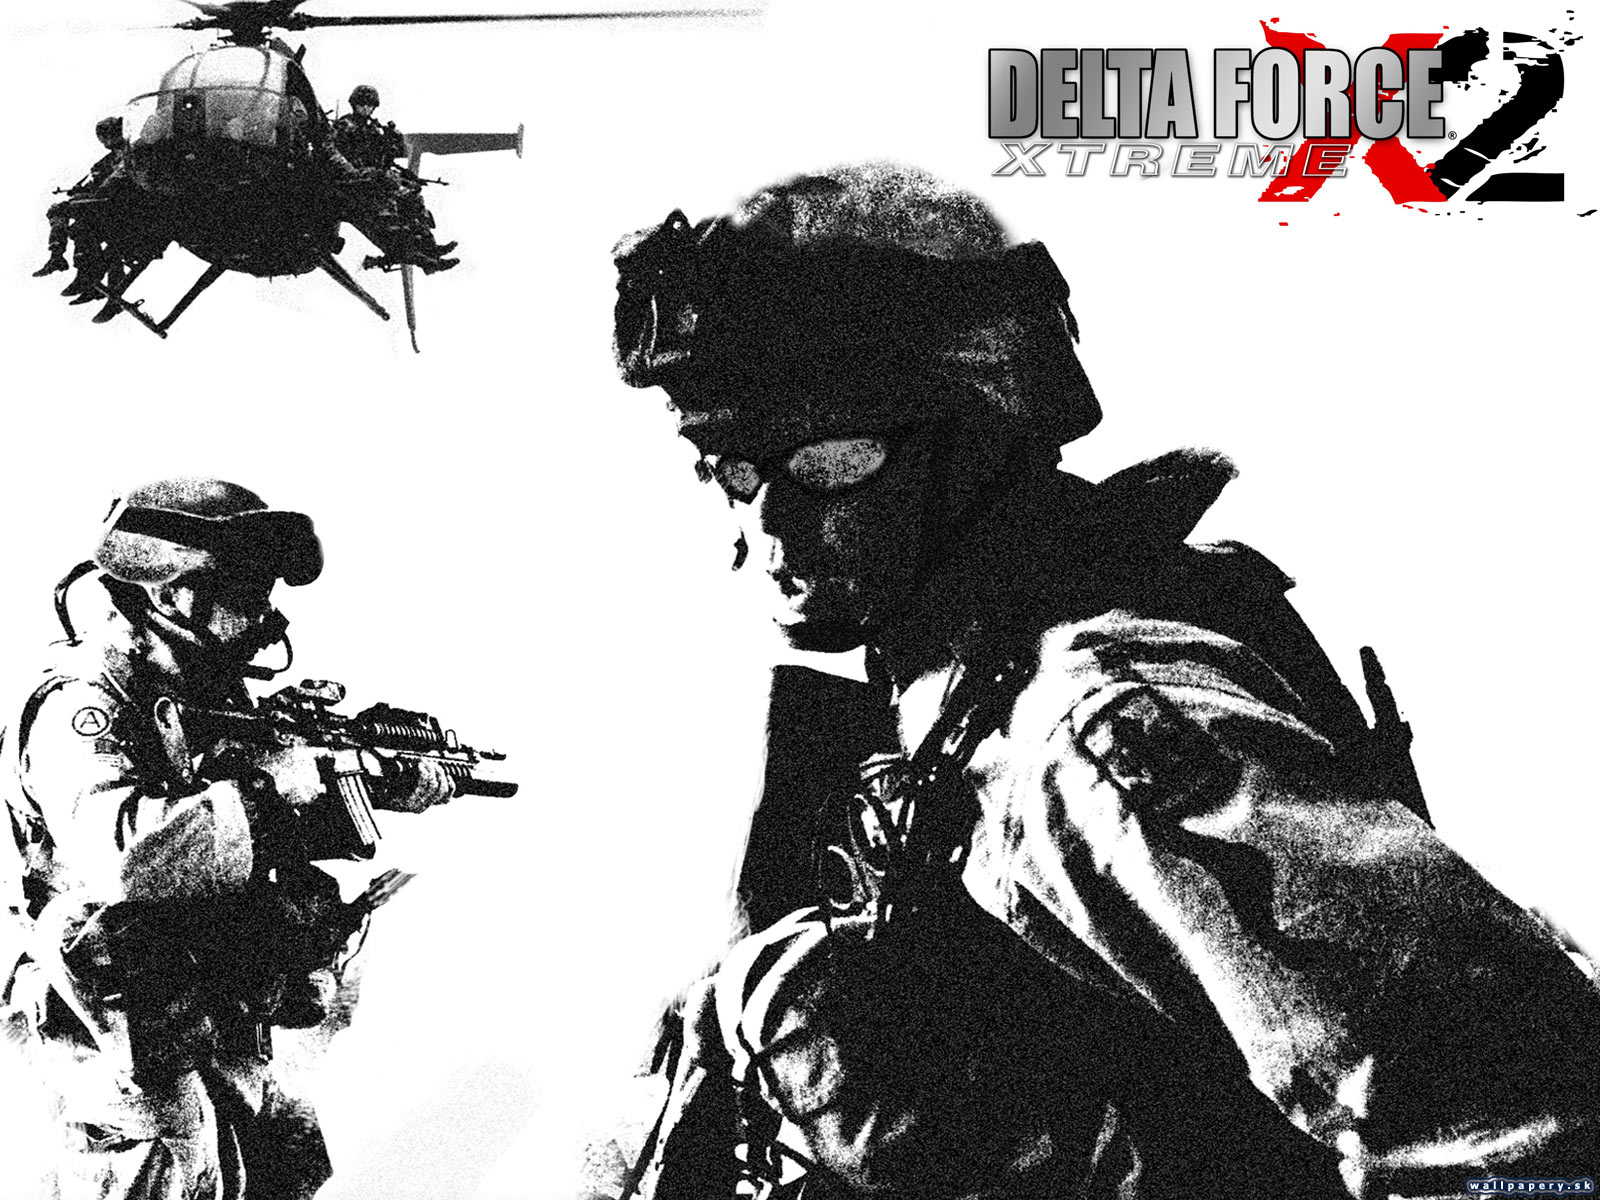 Delta Force Xtreme Wallpaper Abcgames Sk